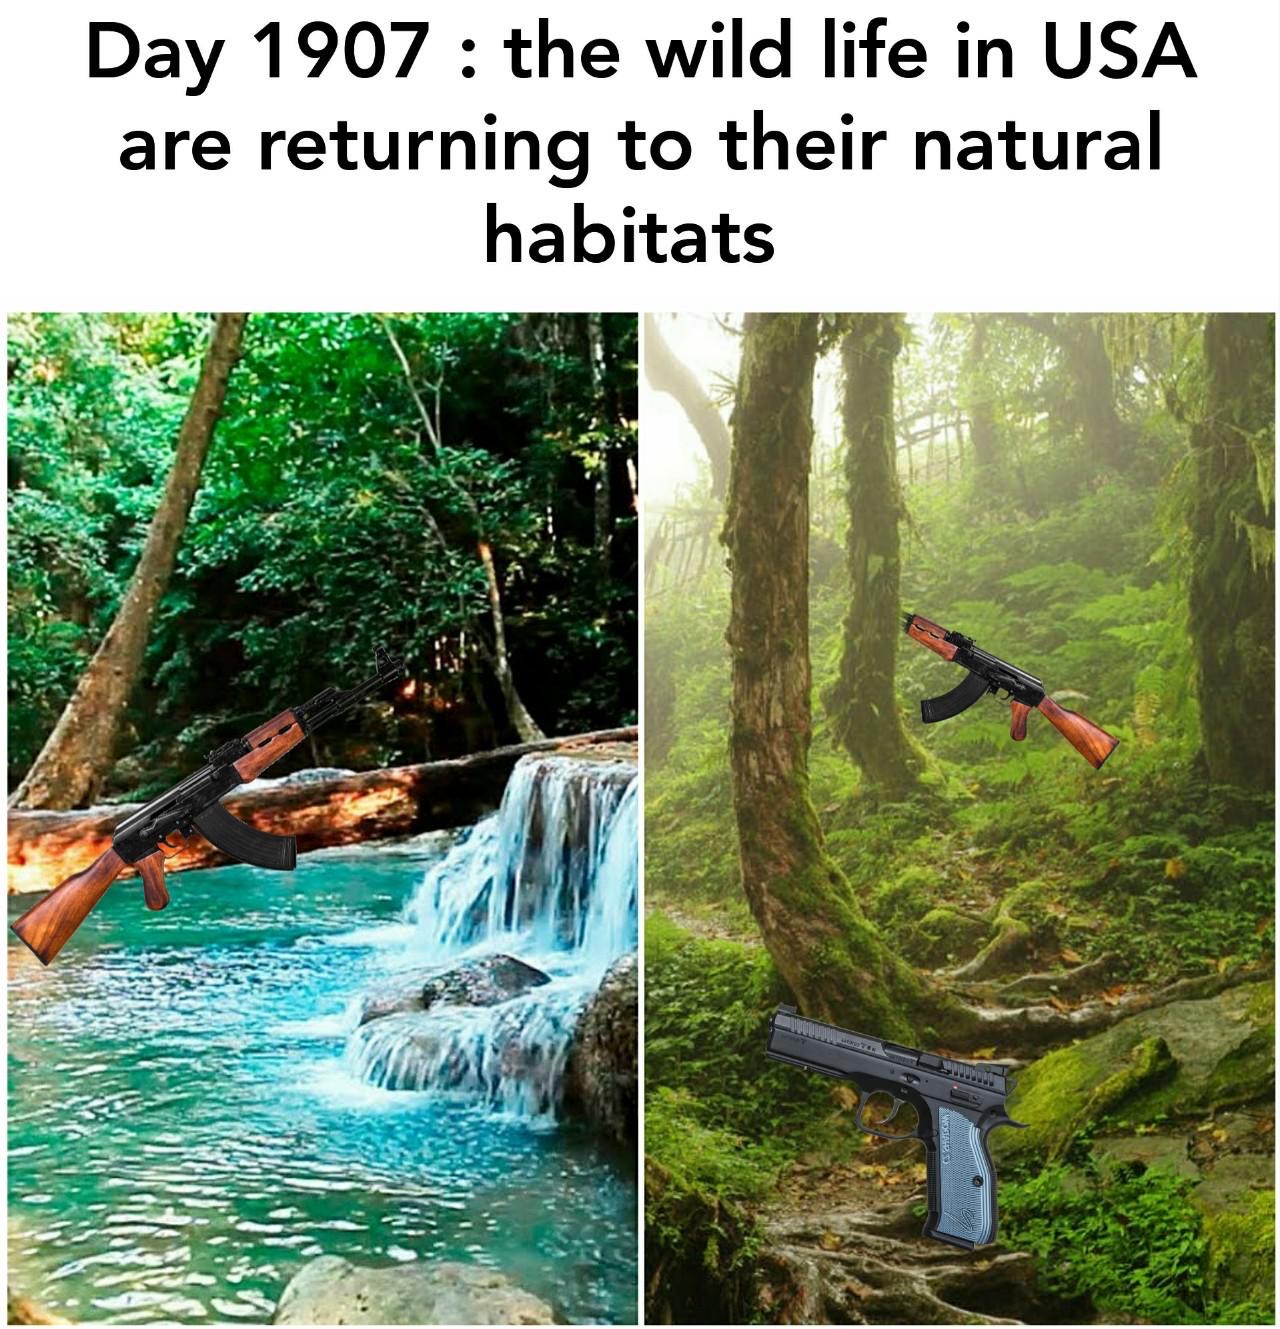 funny memes - water resources - Day 1907 the wild life in Usa are returning to their natural habitats